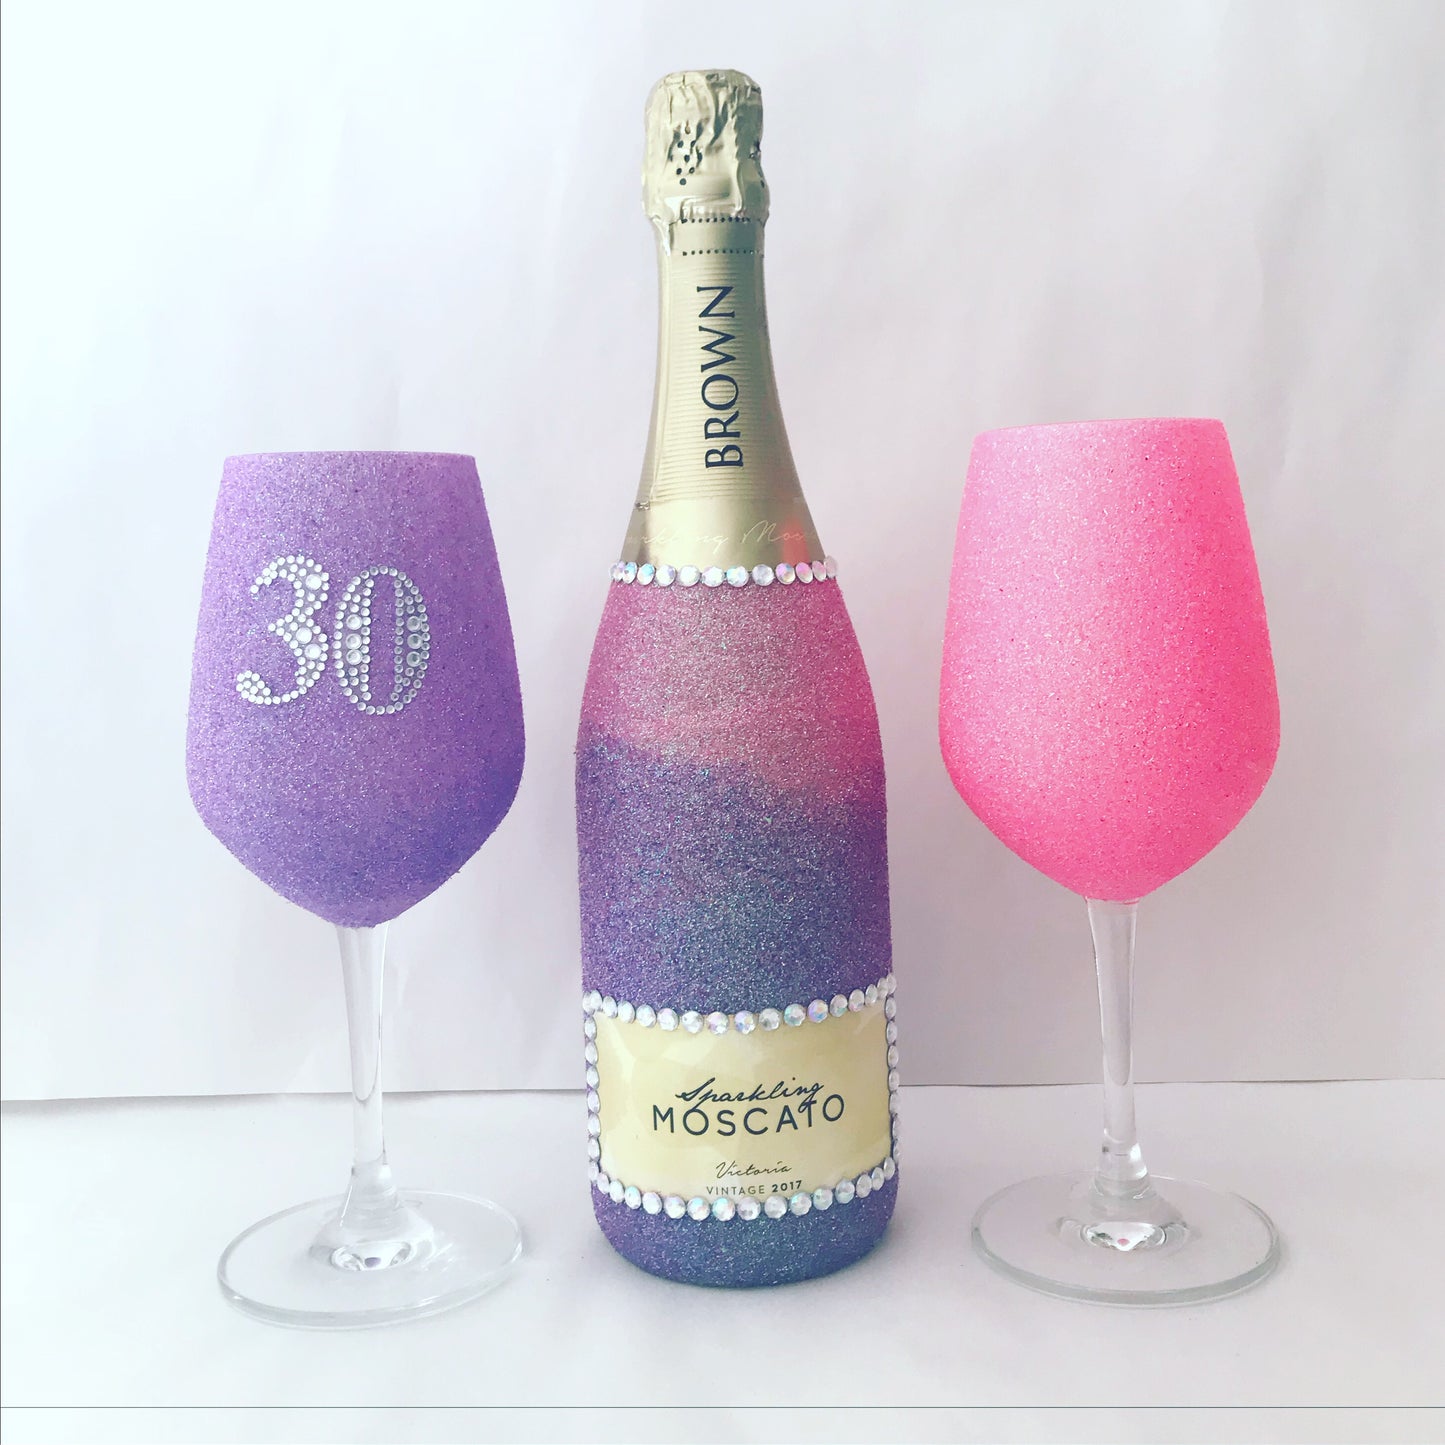 BB moscato ombré with pink and purple glasses includes bling number or initial